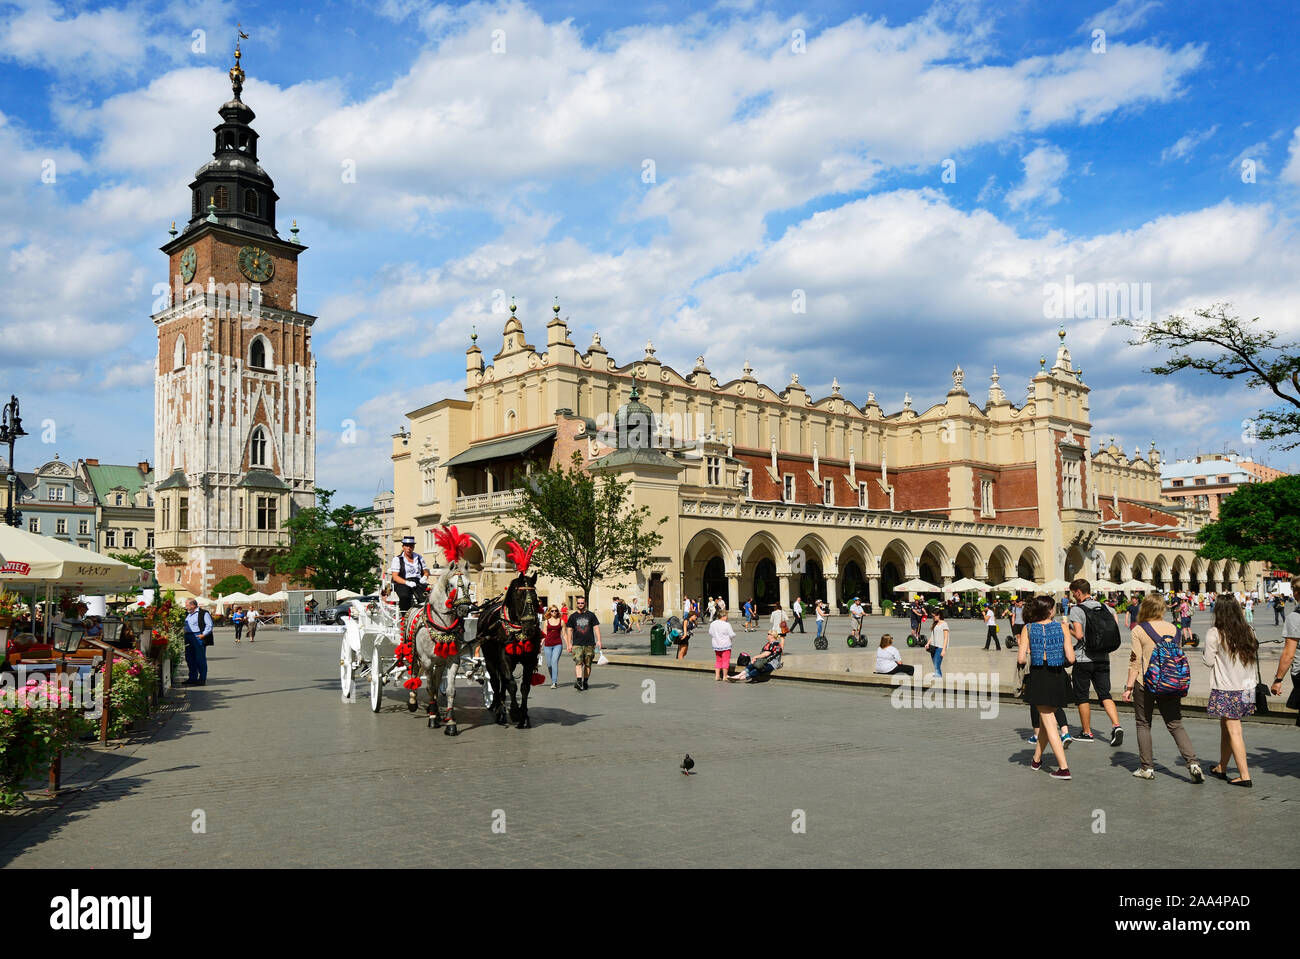 The Town Hall Tower, 70m high, and the Central Market Square (Rynek) of the Old Town of Krakow dates back to the 13th century. It is a Unesco World He Stock Photo